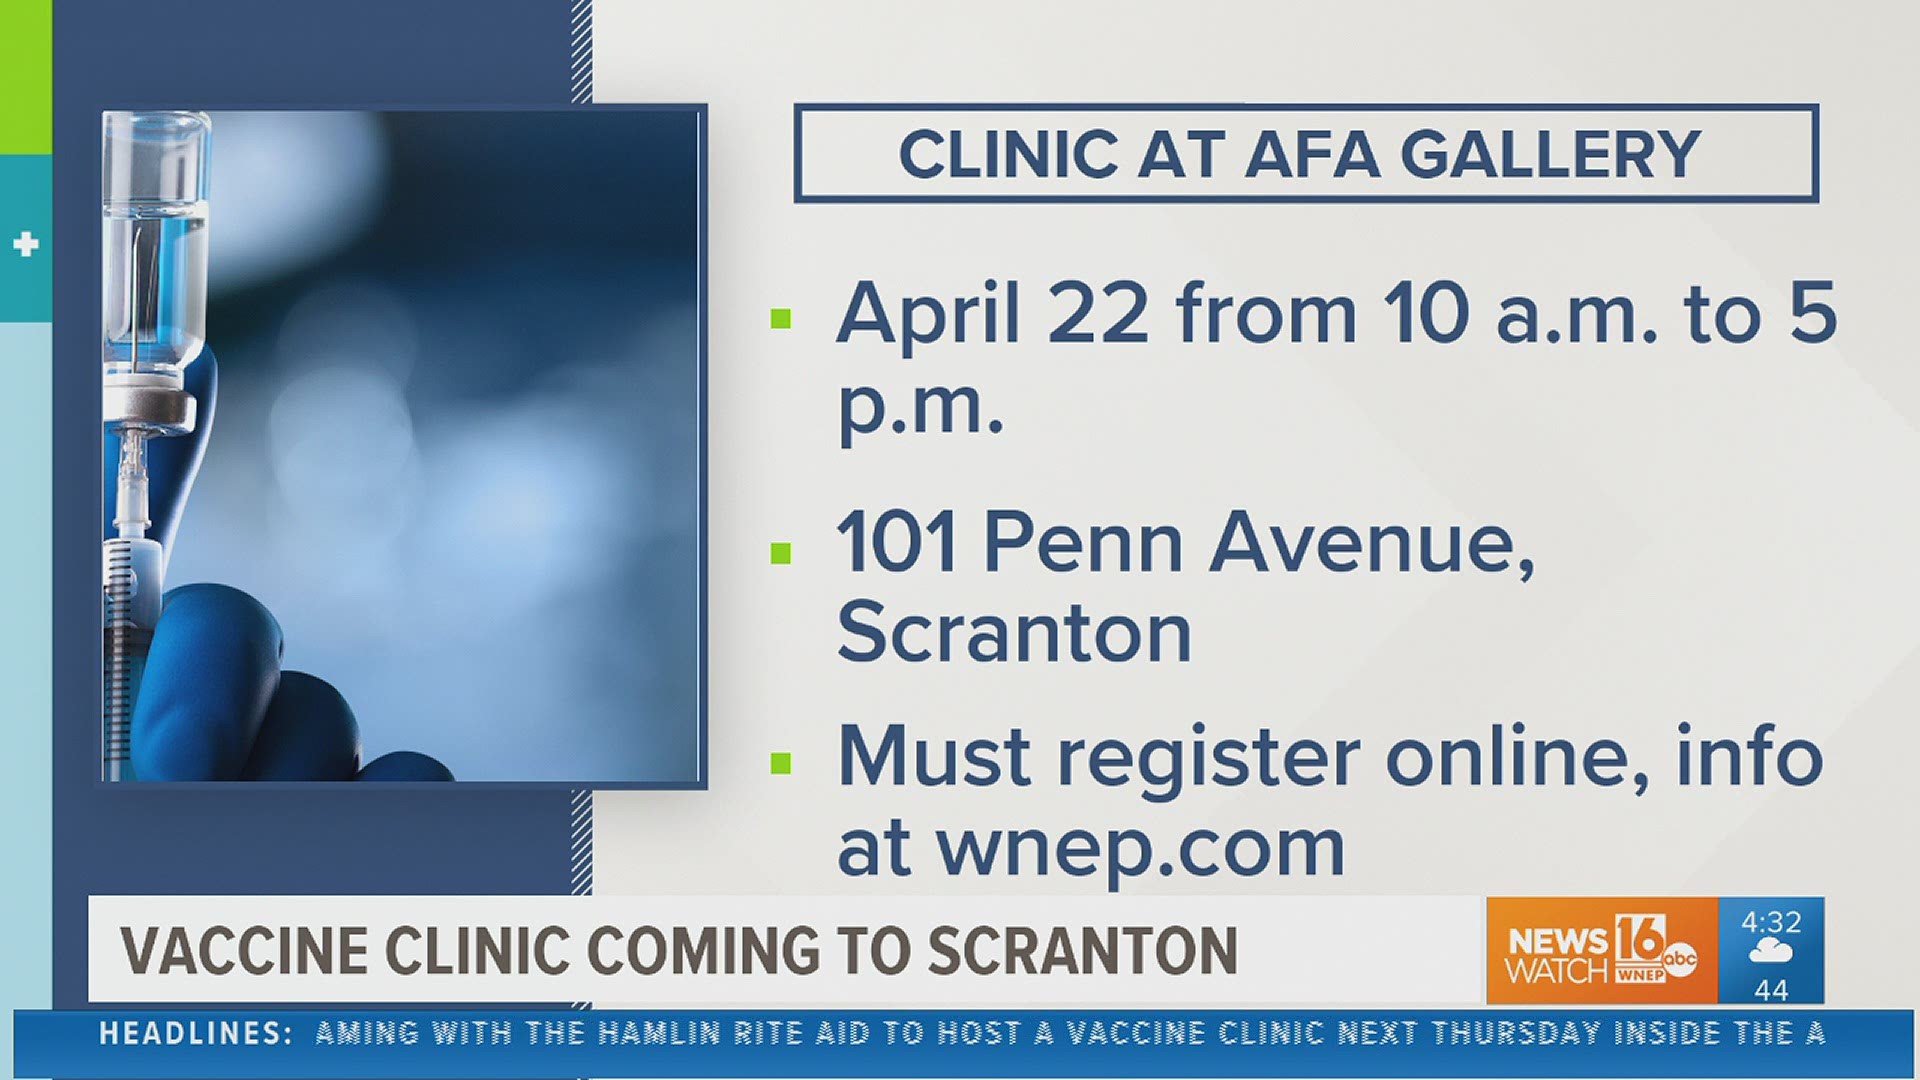 If you need to make an appointment for your vaccination, a non-profit in Scranton is hosting a clinic next week.